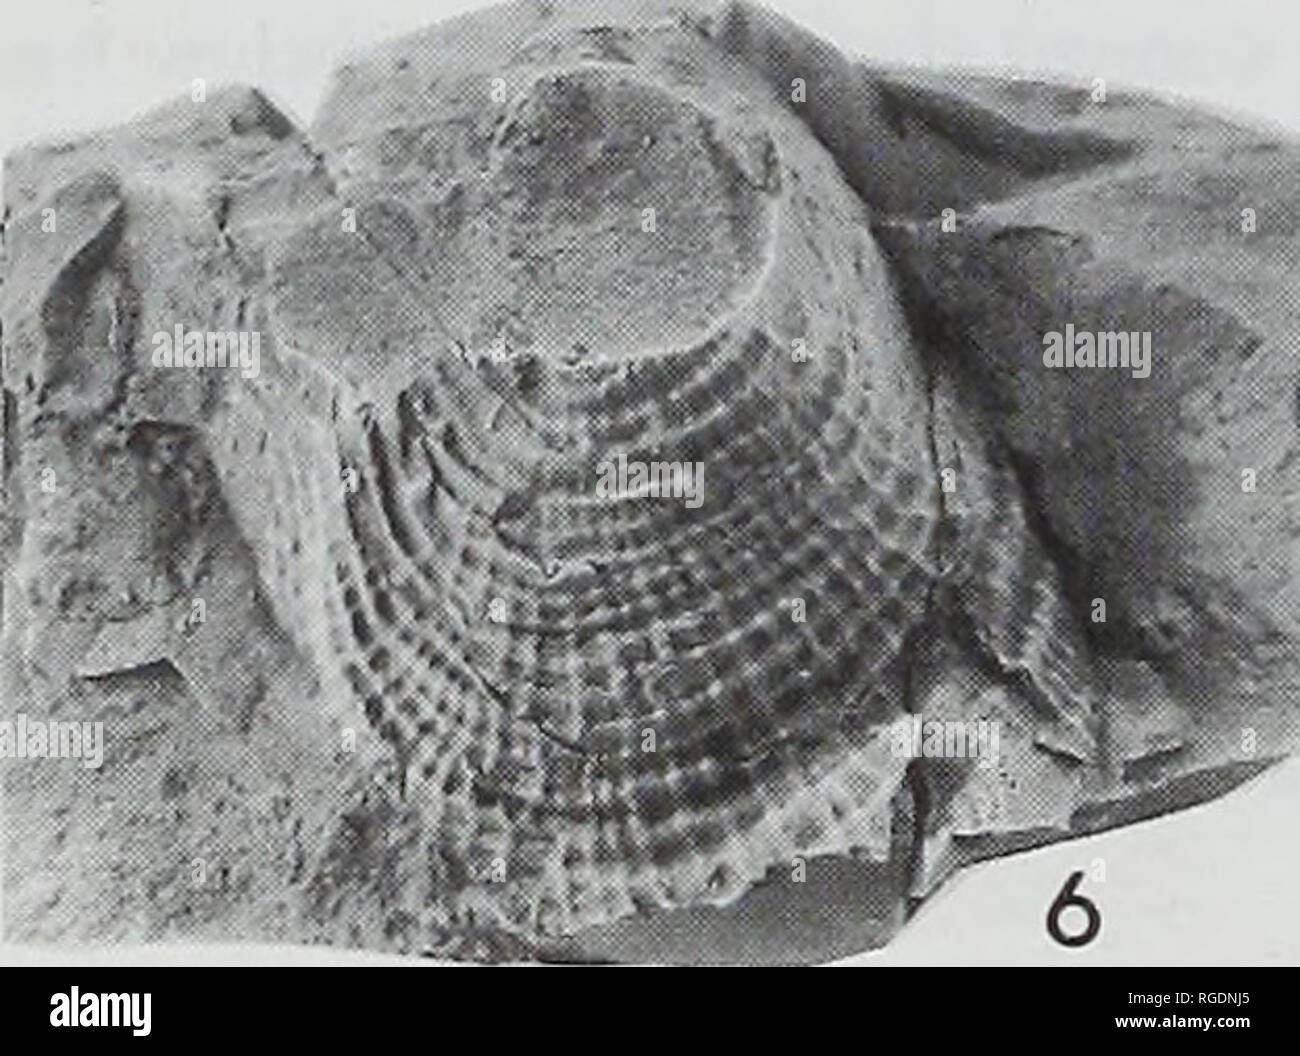 . Bulletin of the Natural Histort Museum. Geology series. The shell material on most specimens is thin, somewhat laminar in appearance and takes the buff colour of the matrix. In order to establish the nature of this shell, slivers from two specimens were studied by qualitative energy dispersive x-ray microanalysis using scanning electron microscopy in the Department of Mineralogy, The Natural History Museum, London. The results show a strong dominance of calcium, with no magnesium or phosphorus present (Fig. 9). The mineralogy indicates dominance of calcium carbonate (lacking magnesium) and t Stock Photo